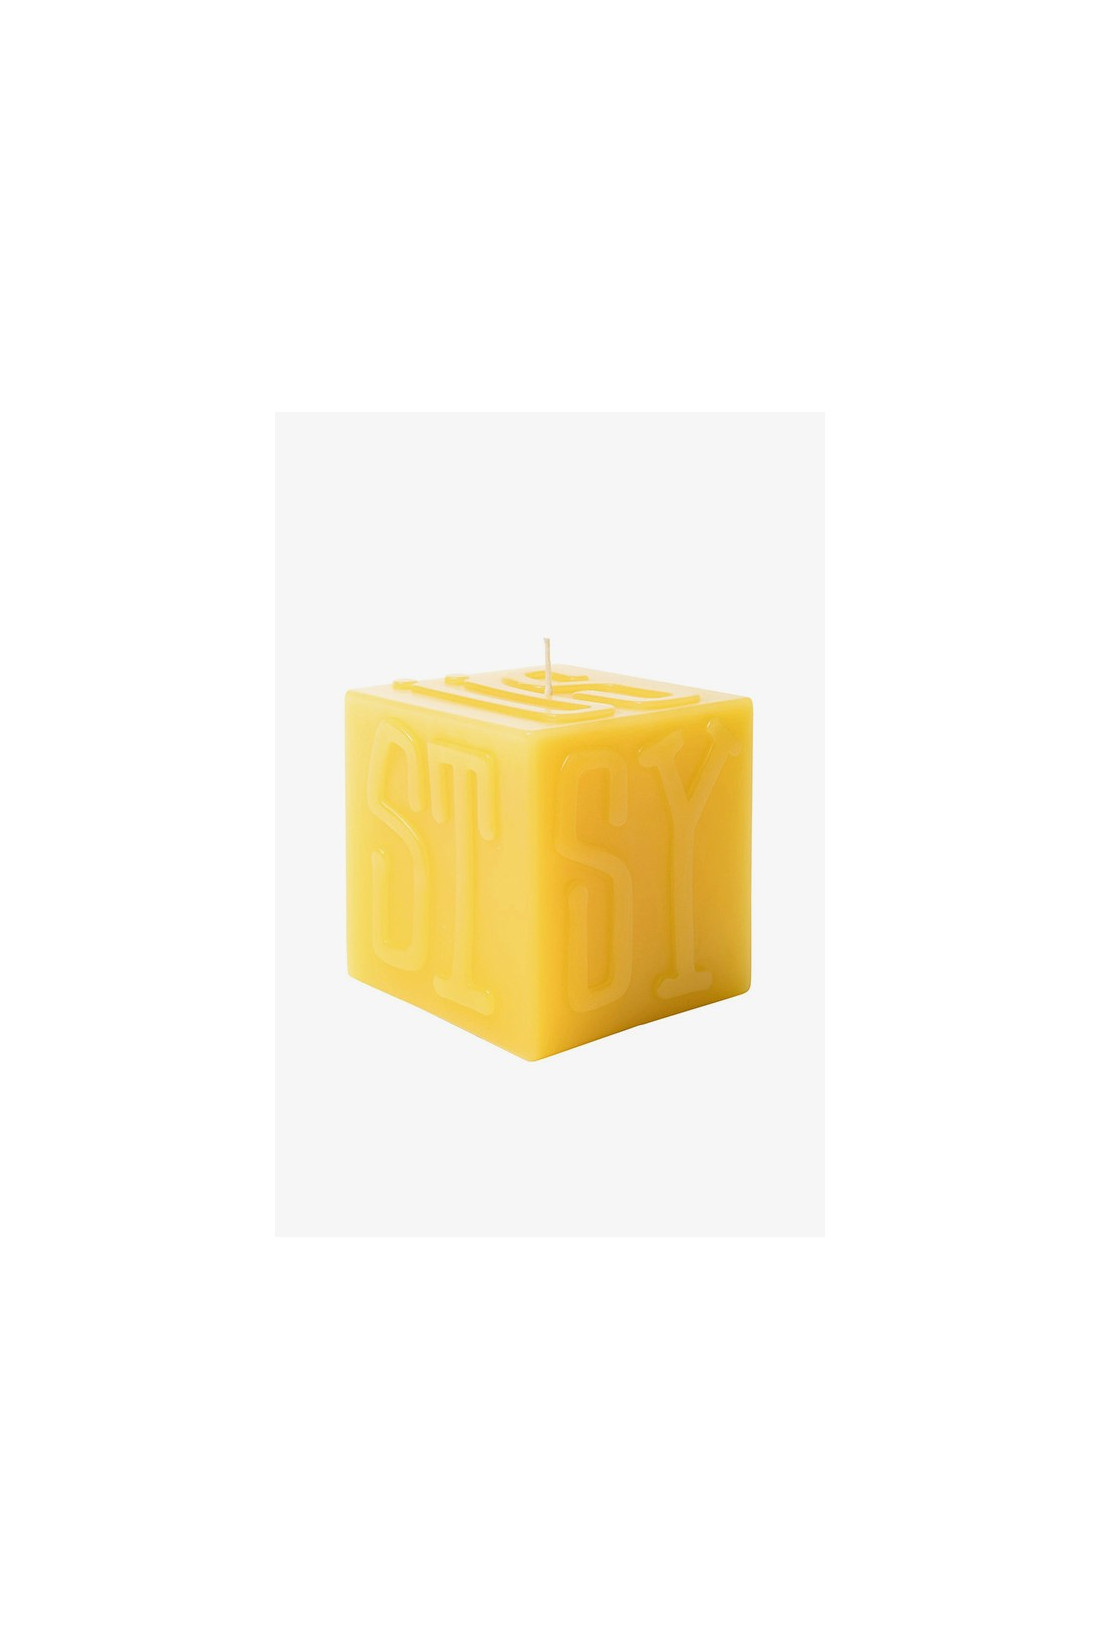 STUSSY / Stussy cube candle Yellow